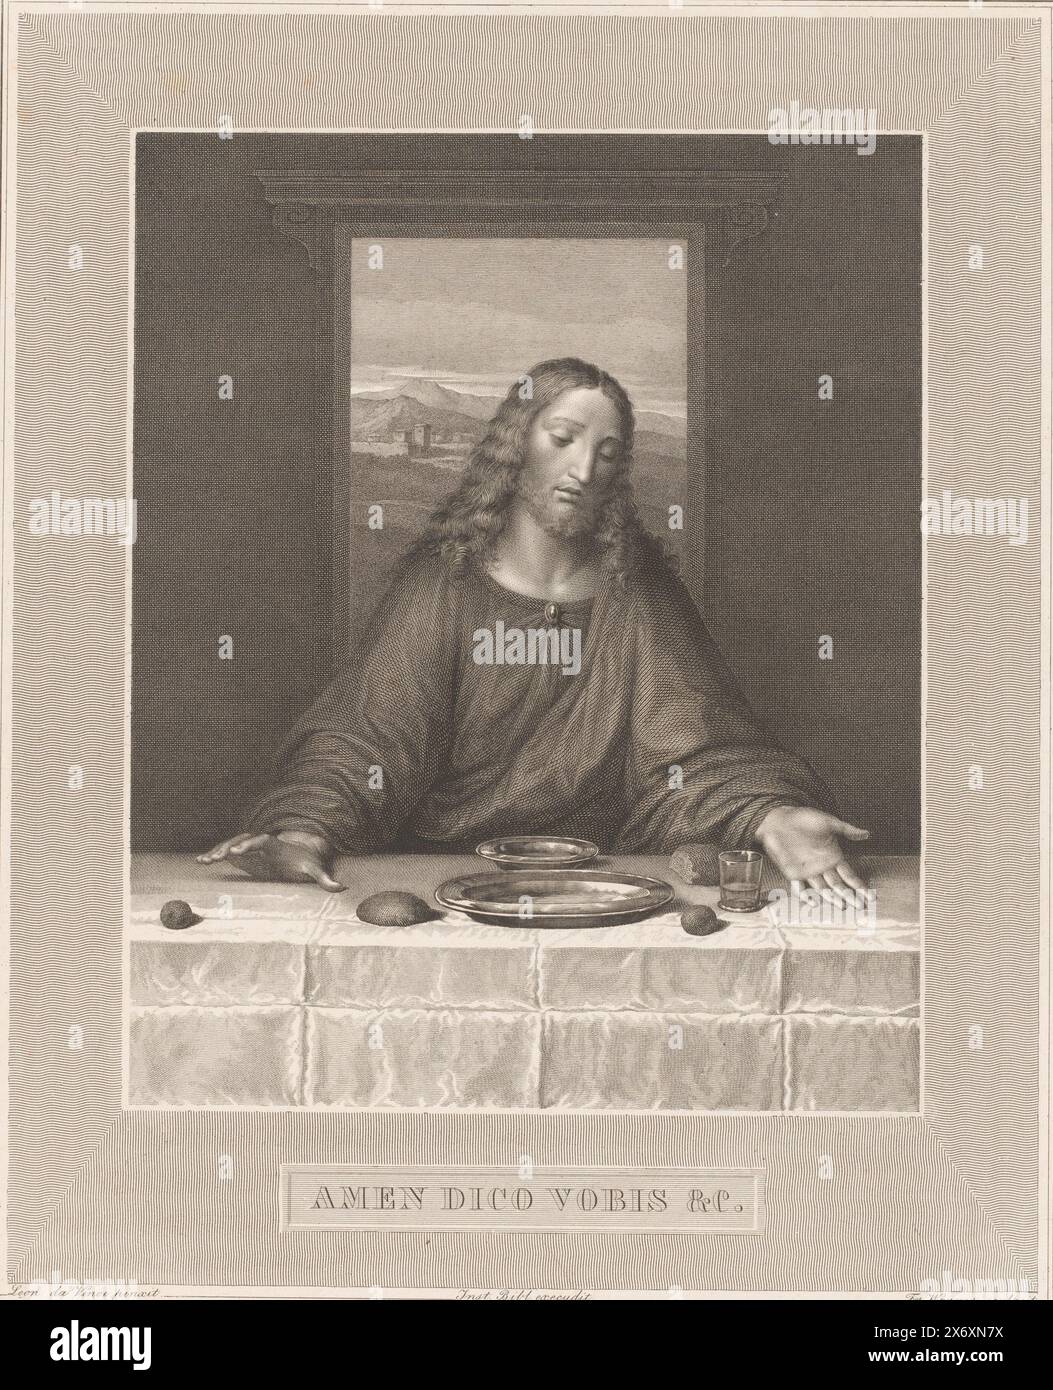 Christ at the Last Supper, Amen dico vobis (title on object), print, print maker: Friedrich Wagner, (mentioned on object), after painting by: Leonardo da Vinci, (mentioned on object), publisher: Bibliographisches Institut, (mentioned on object), print maker: Germany, after painting by: Milaan, 1811 - after 1850, paper, steel engraving, height, 428 mm × width, 340 mm Stock Photo